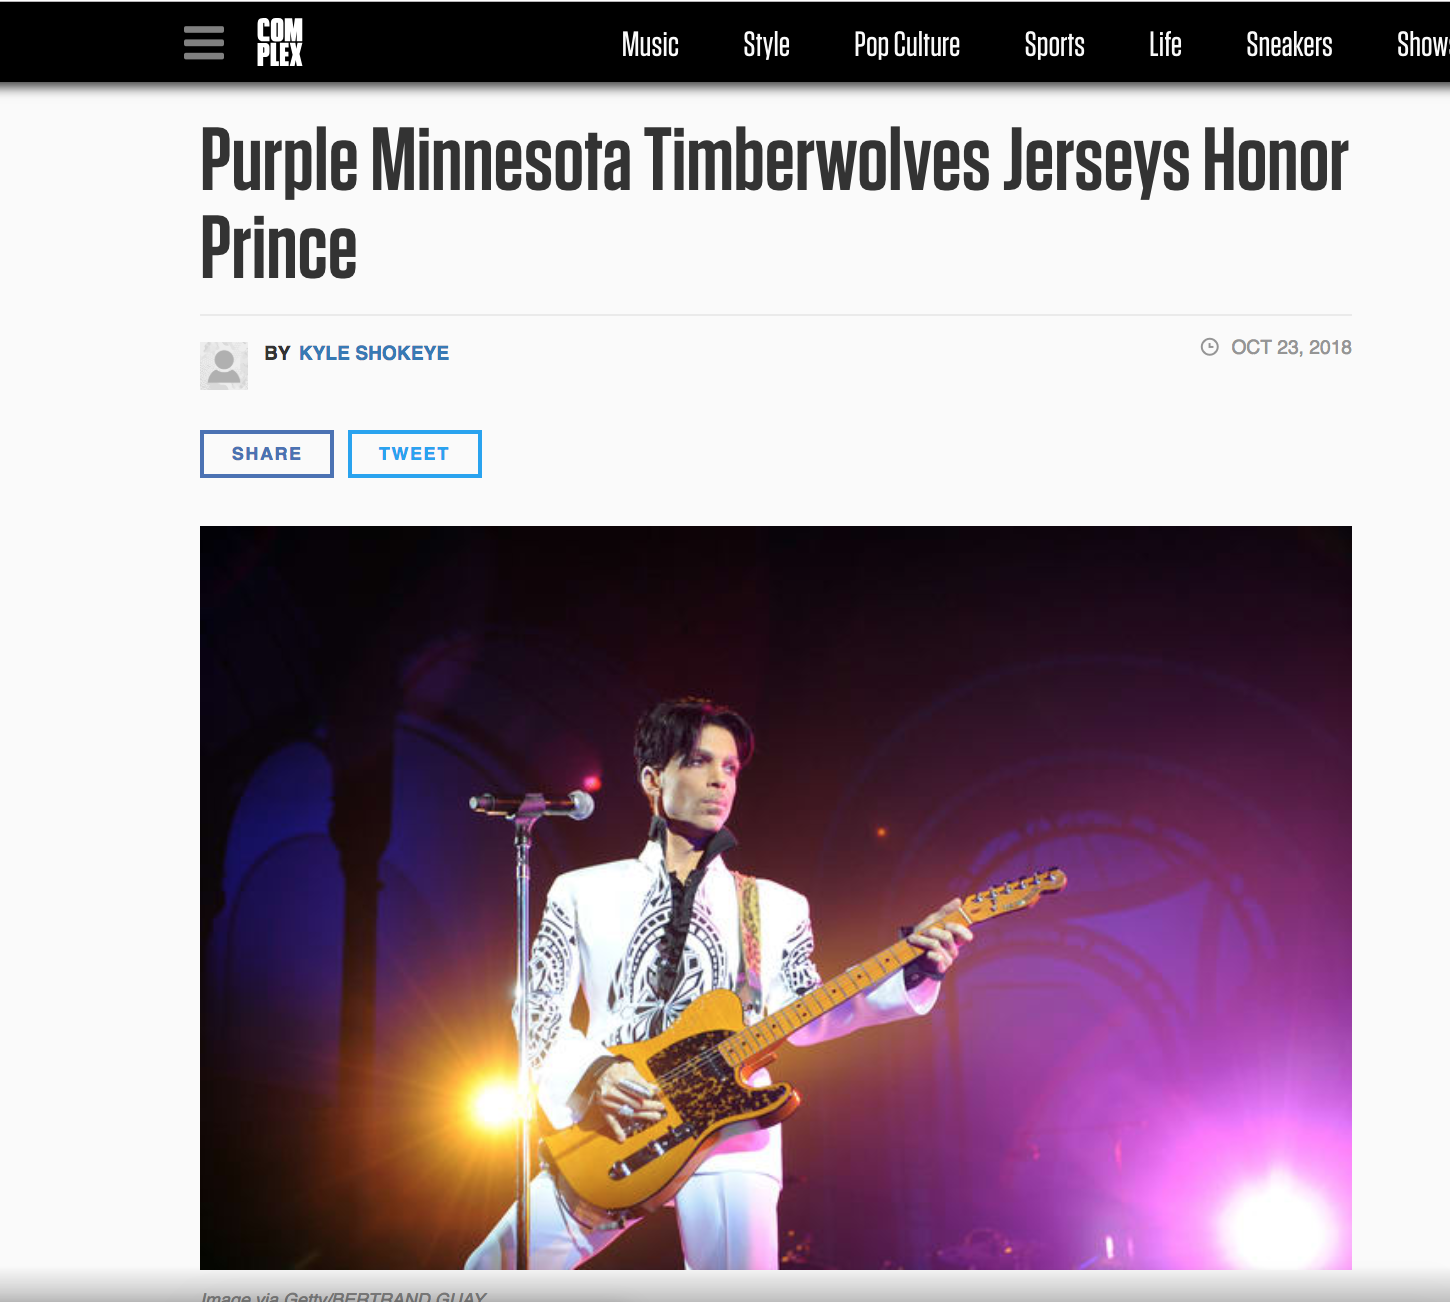 Minnesota Timberwolves Honor Prince With New Uniforms